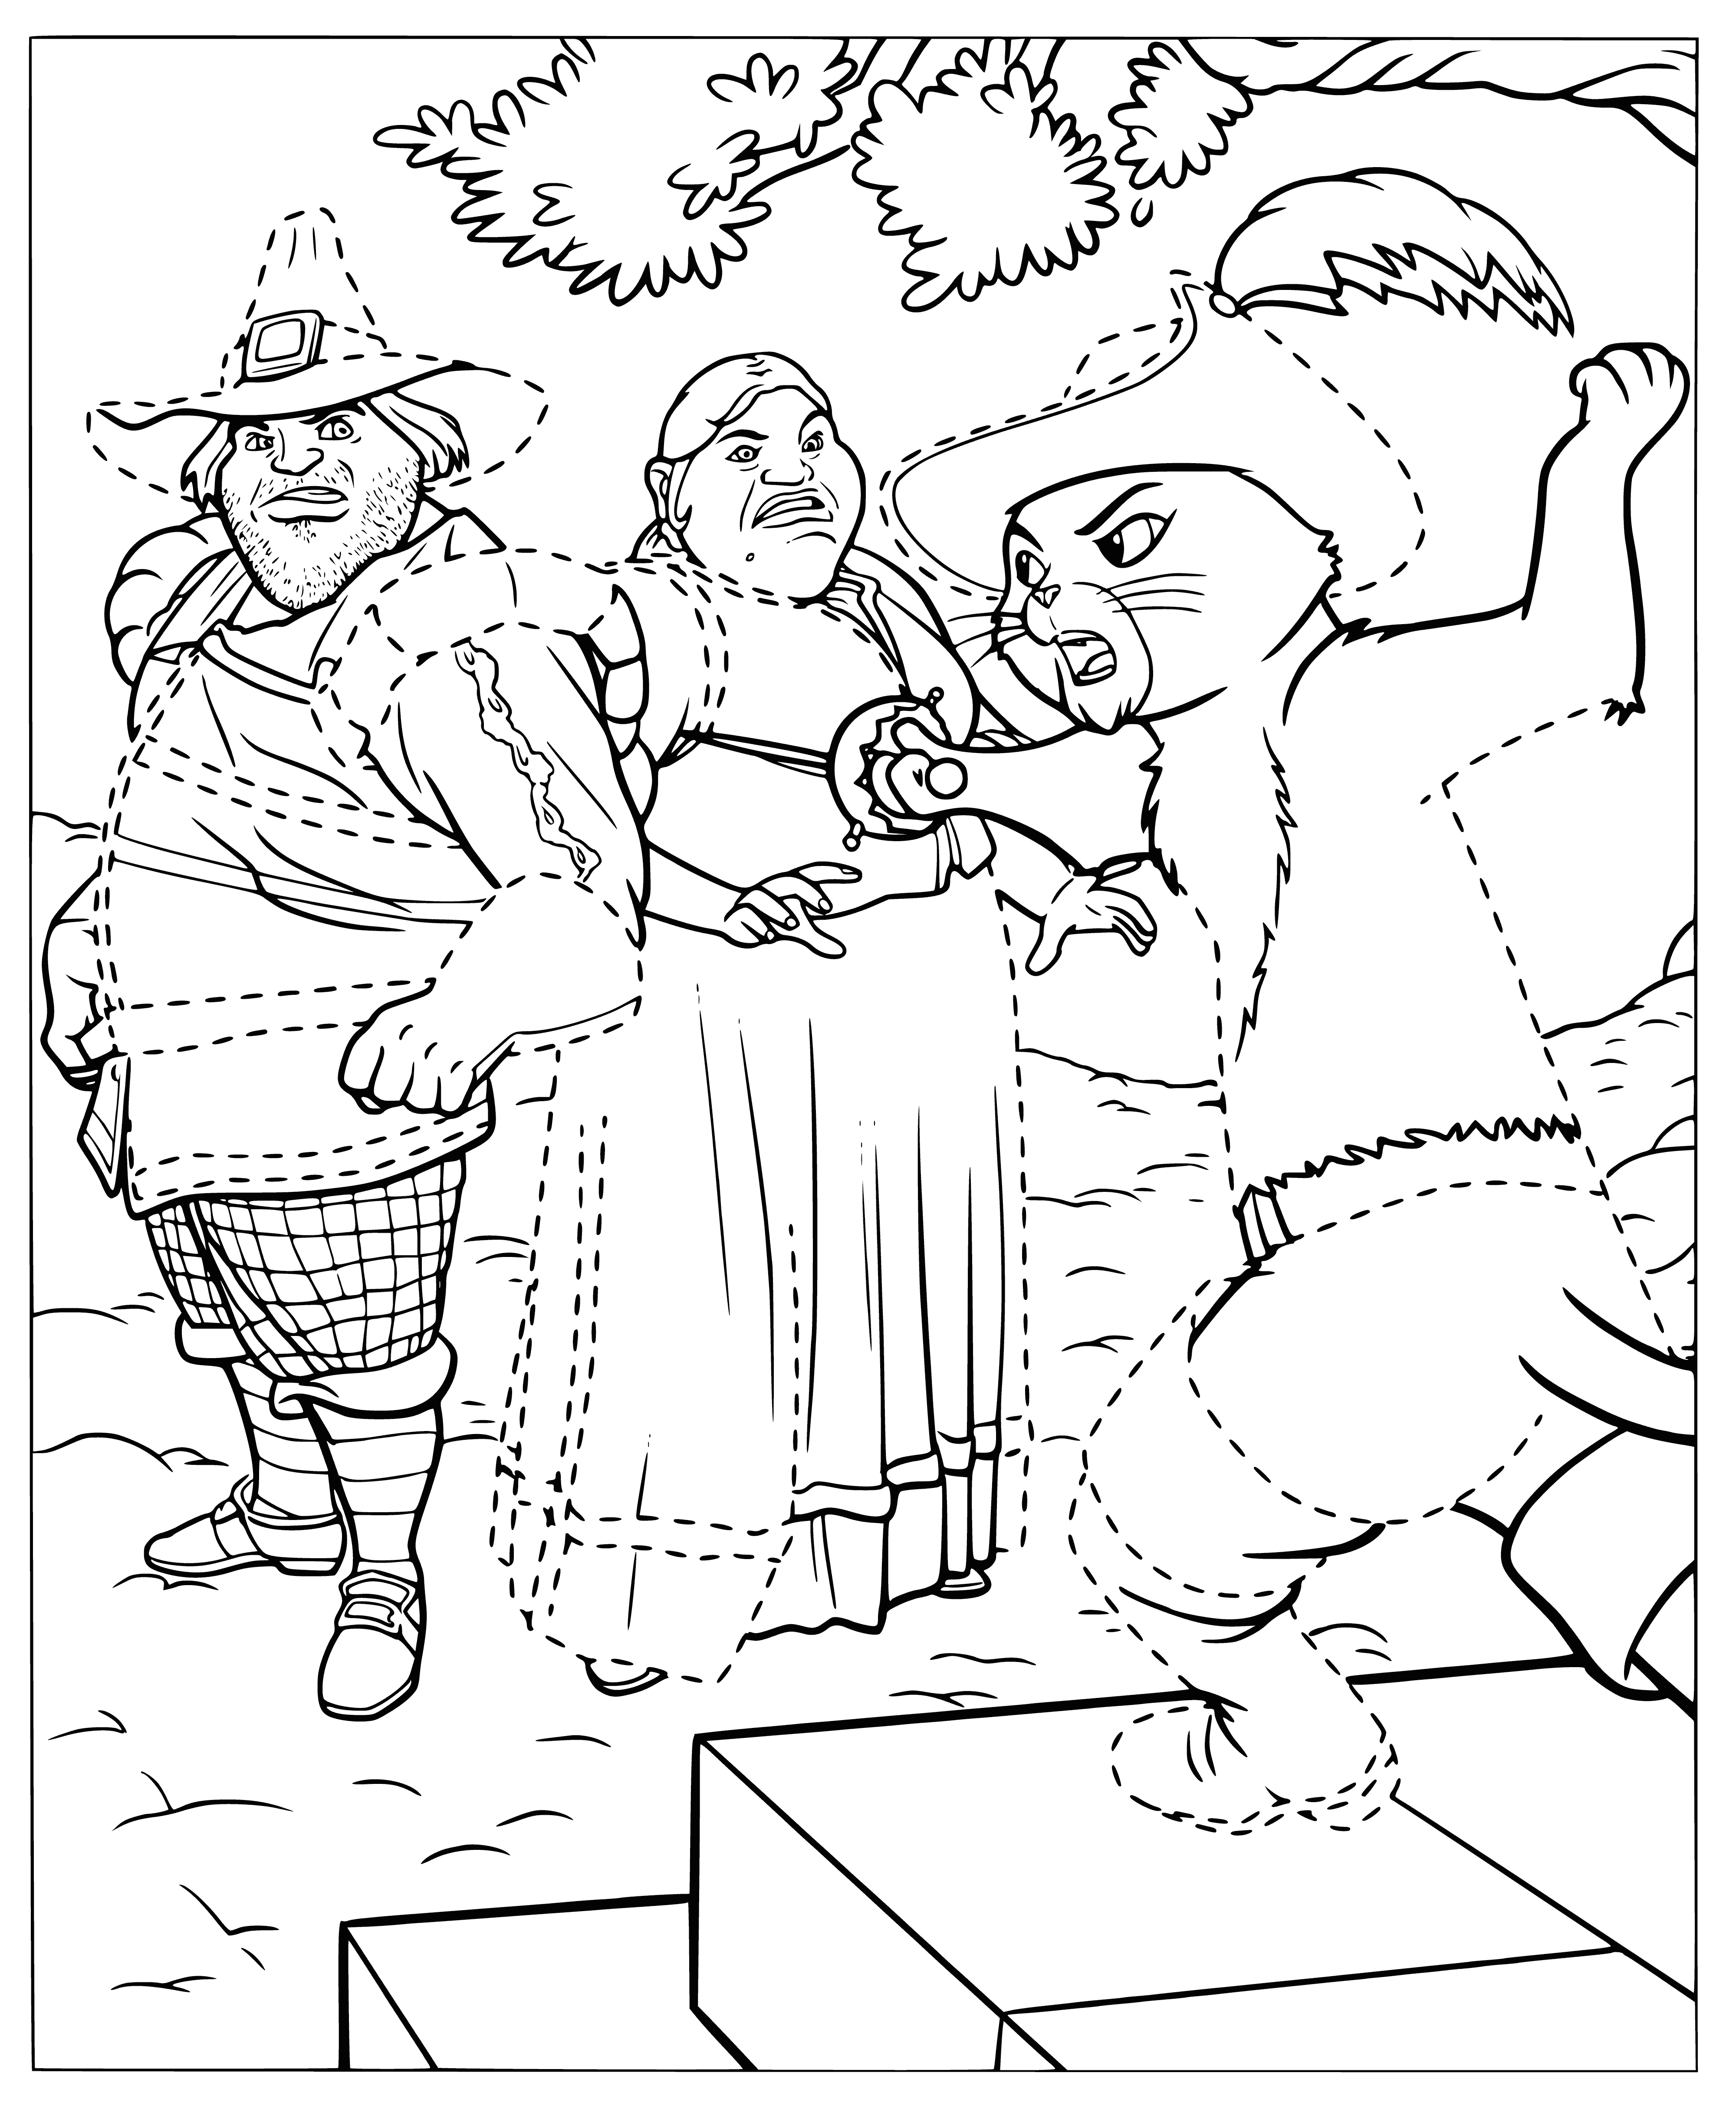 coloring page: Group of 5 screaming in the rain w/clothes of diff. colors, in frnt of a tree, and a house; covered by large dark cloud.